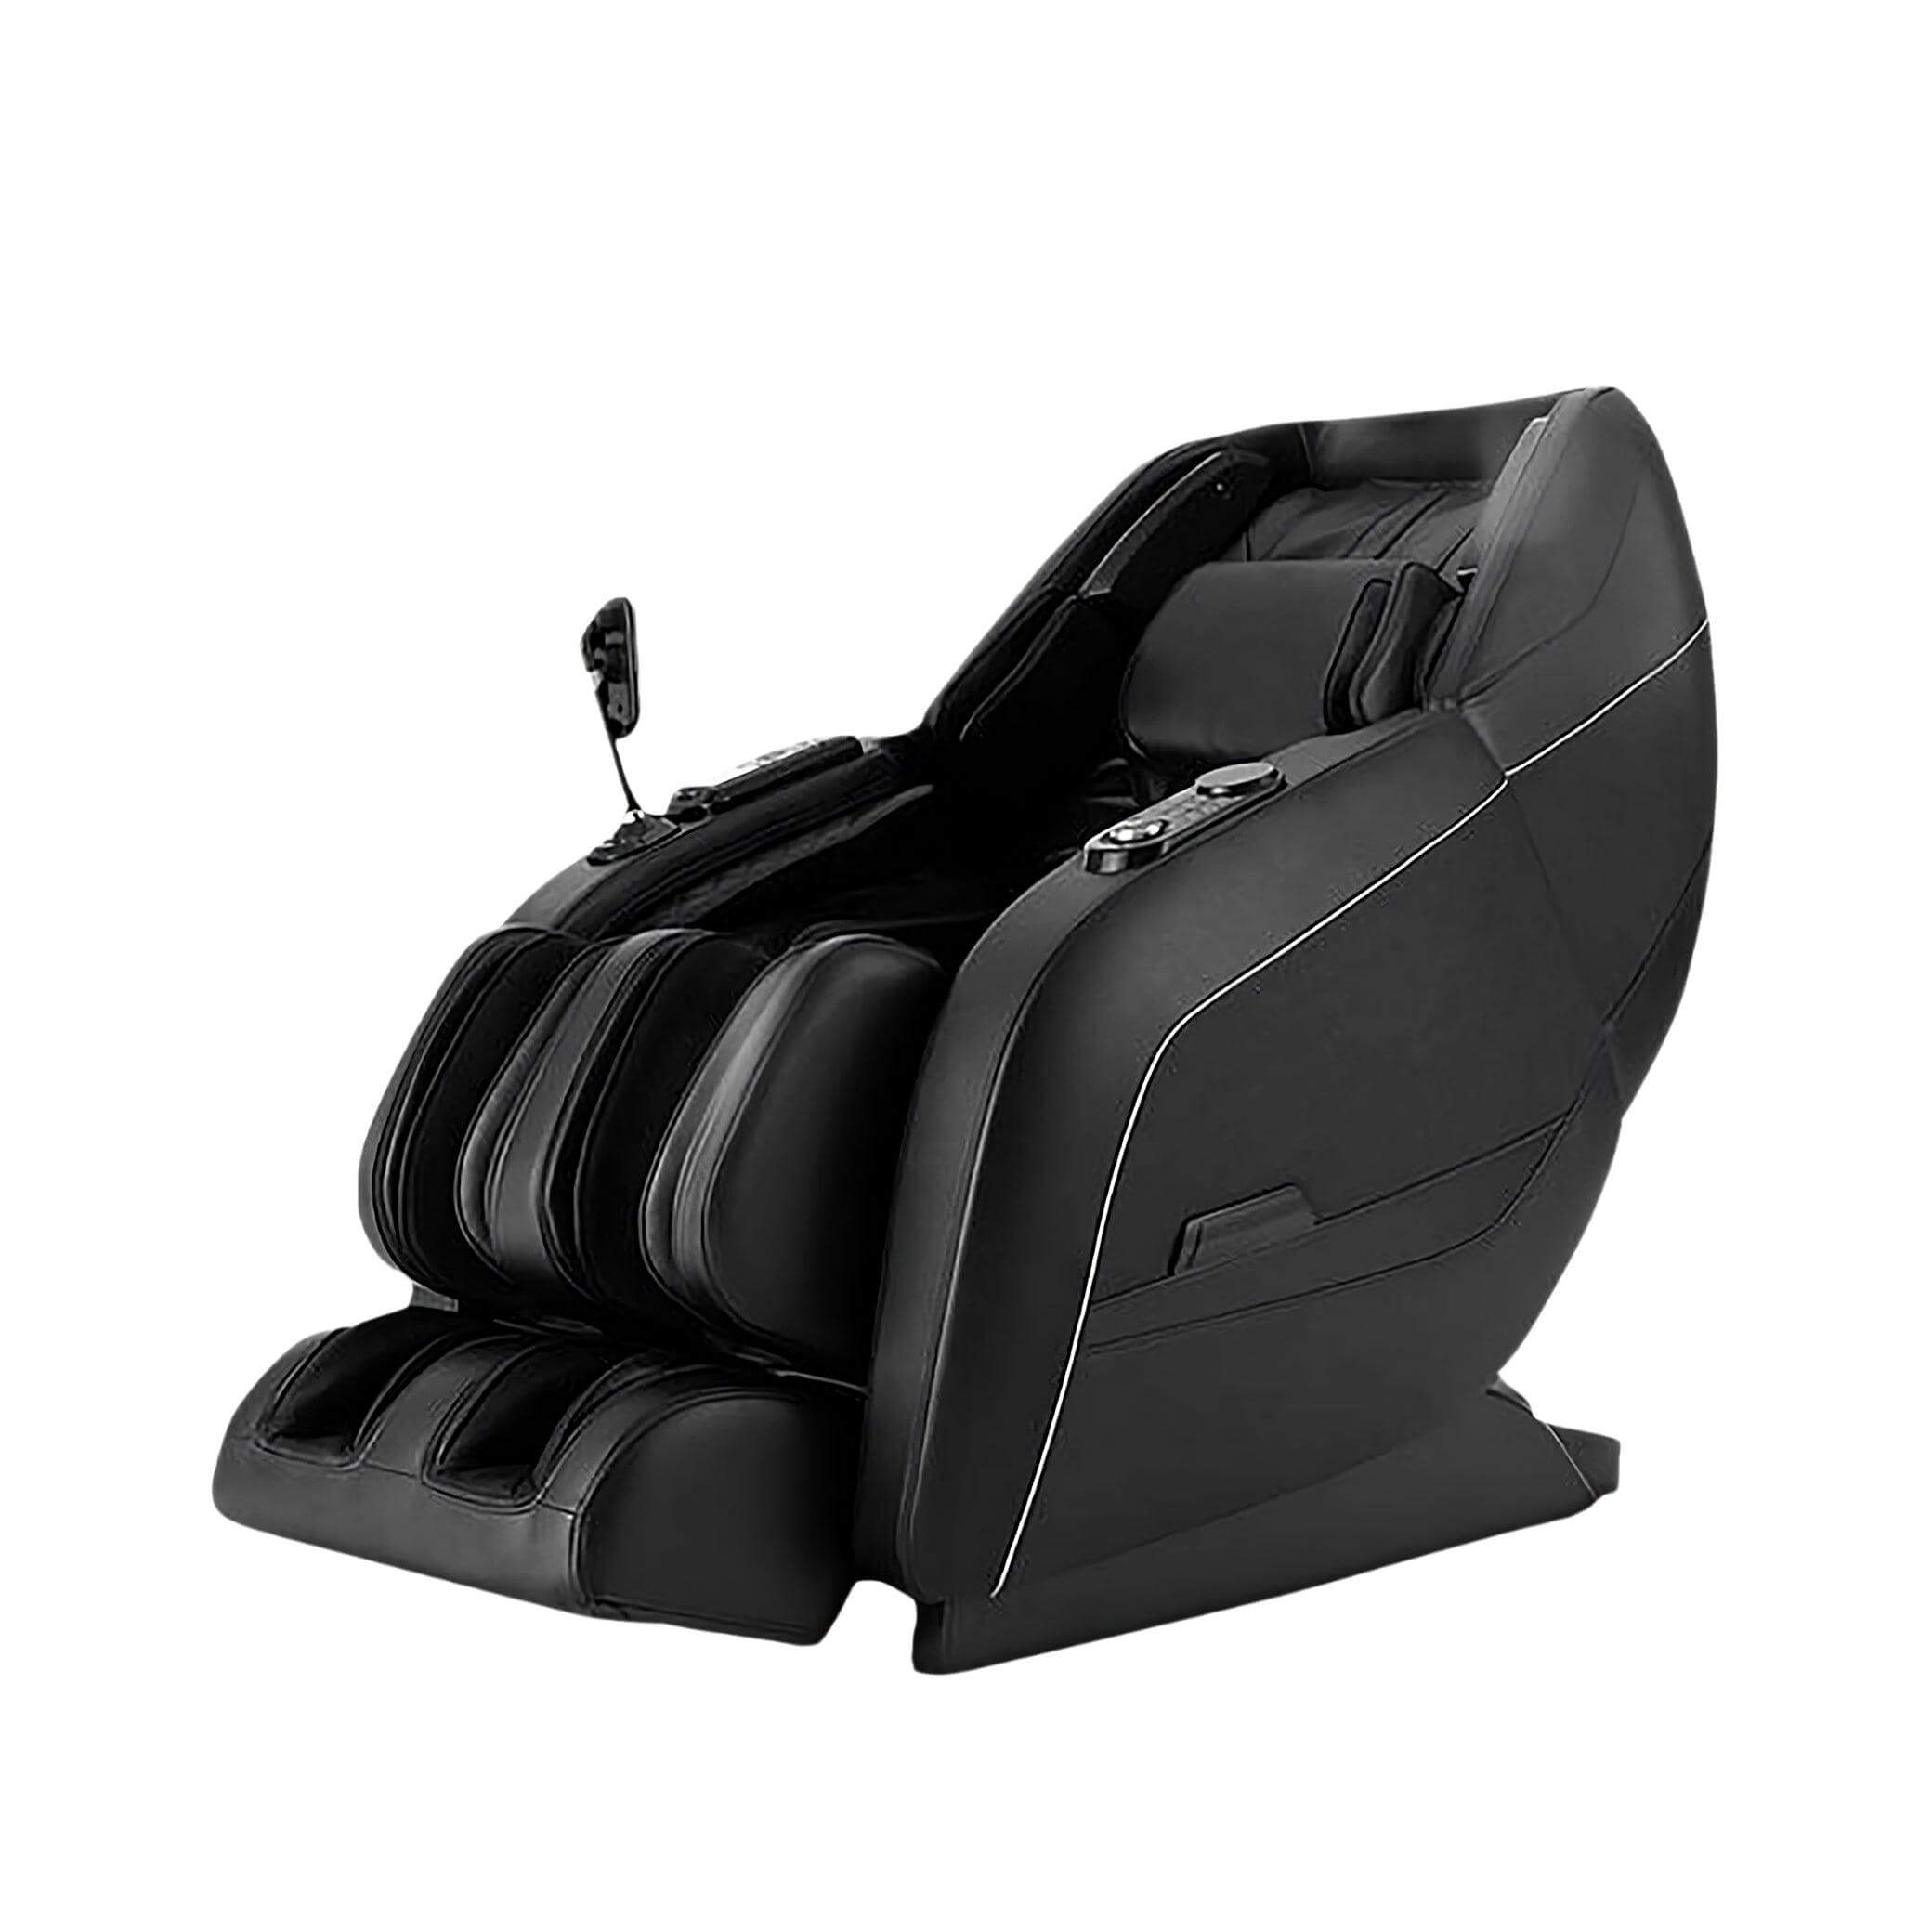 Best Lumina 4D Massage Chair in UAE available at massage chair shop Dubai, perfect for ultimate relaxation and comfort.